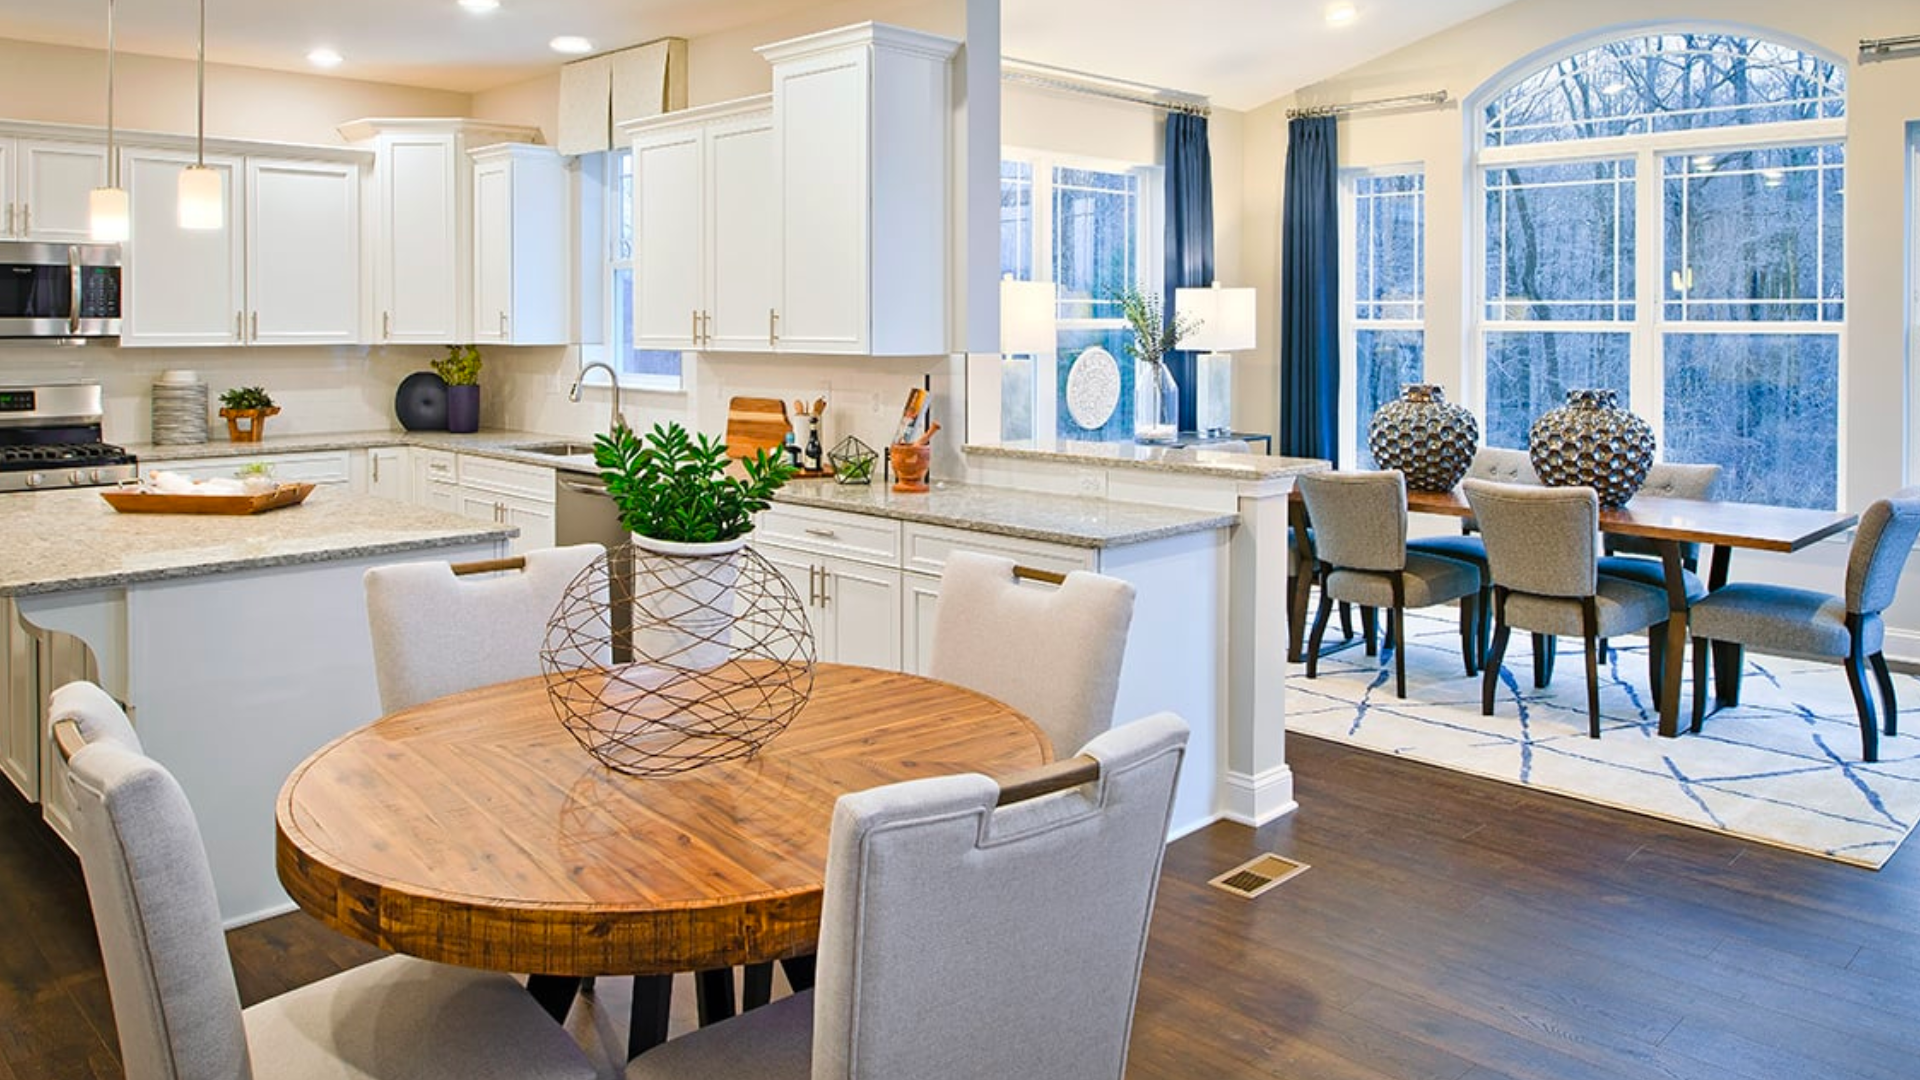 5 Reasons To Fall in Love With Lennar at Brunswick Crossing